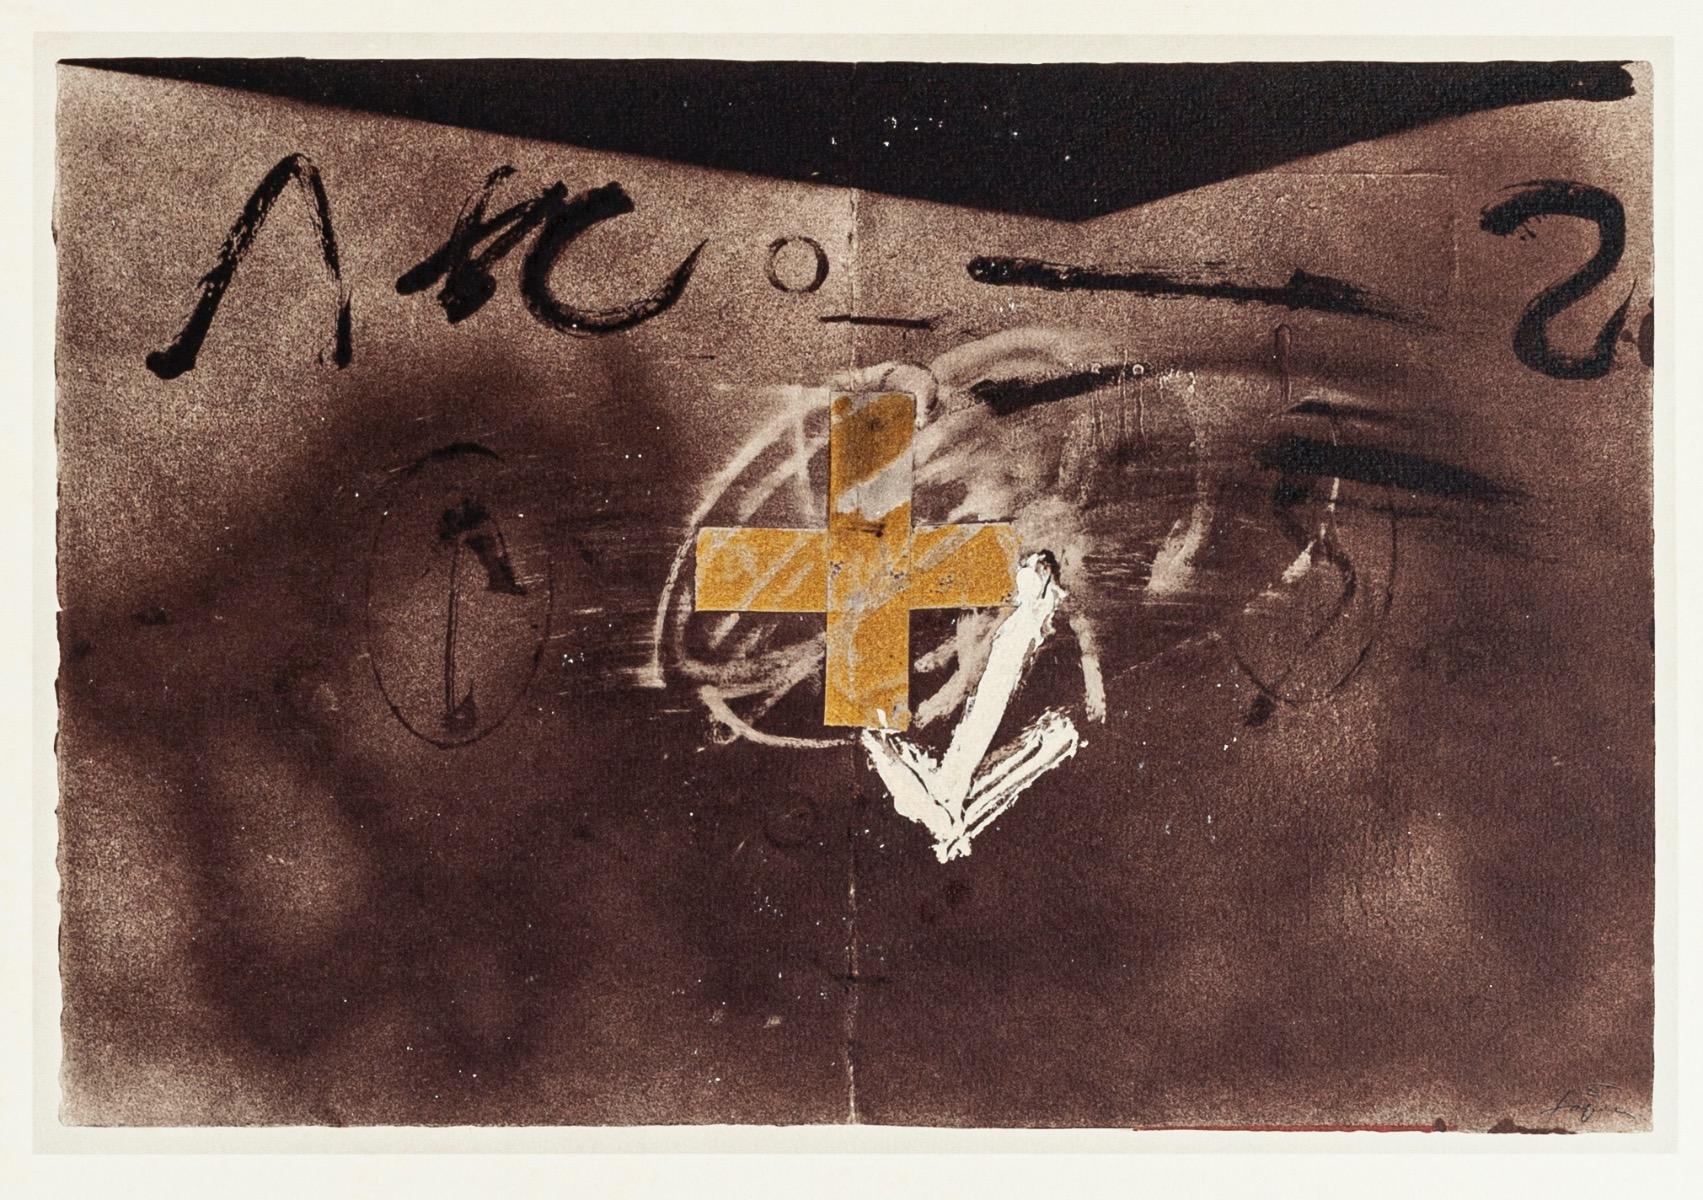 Collage with Cross and Arrow - Vintage Offset Print After Antoni Tàpies - 1982